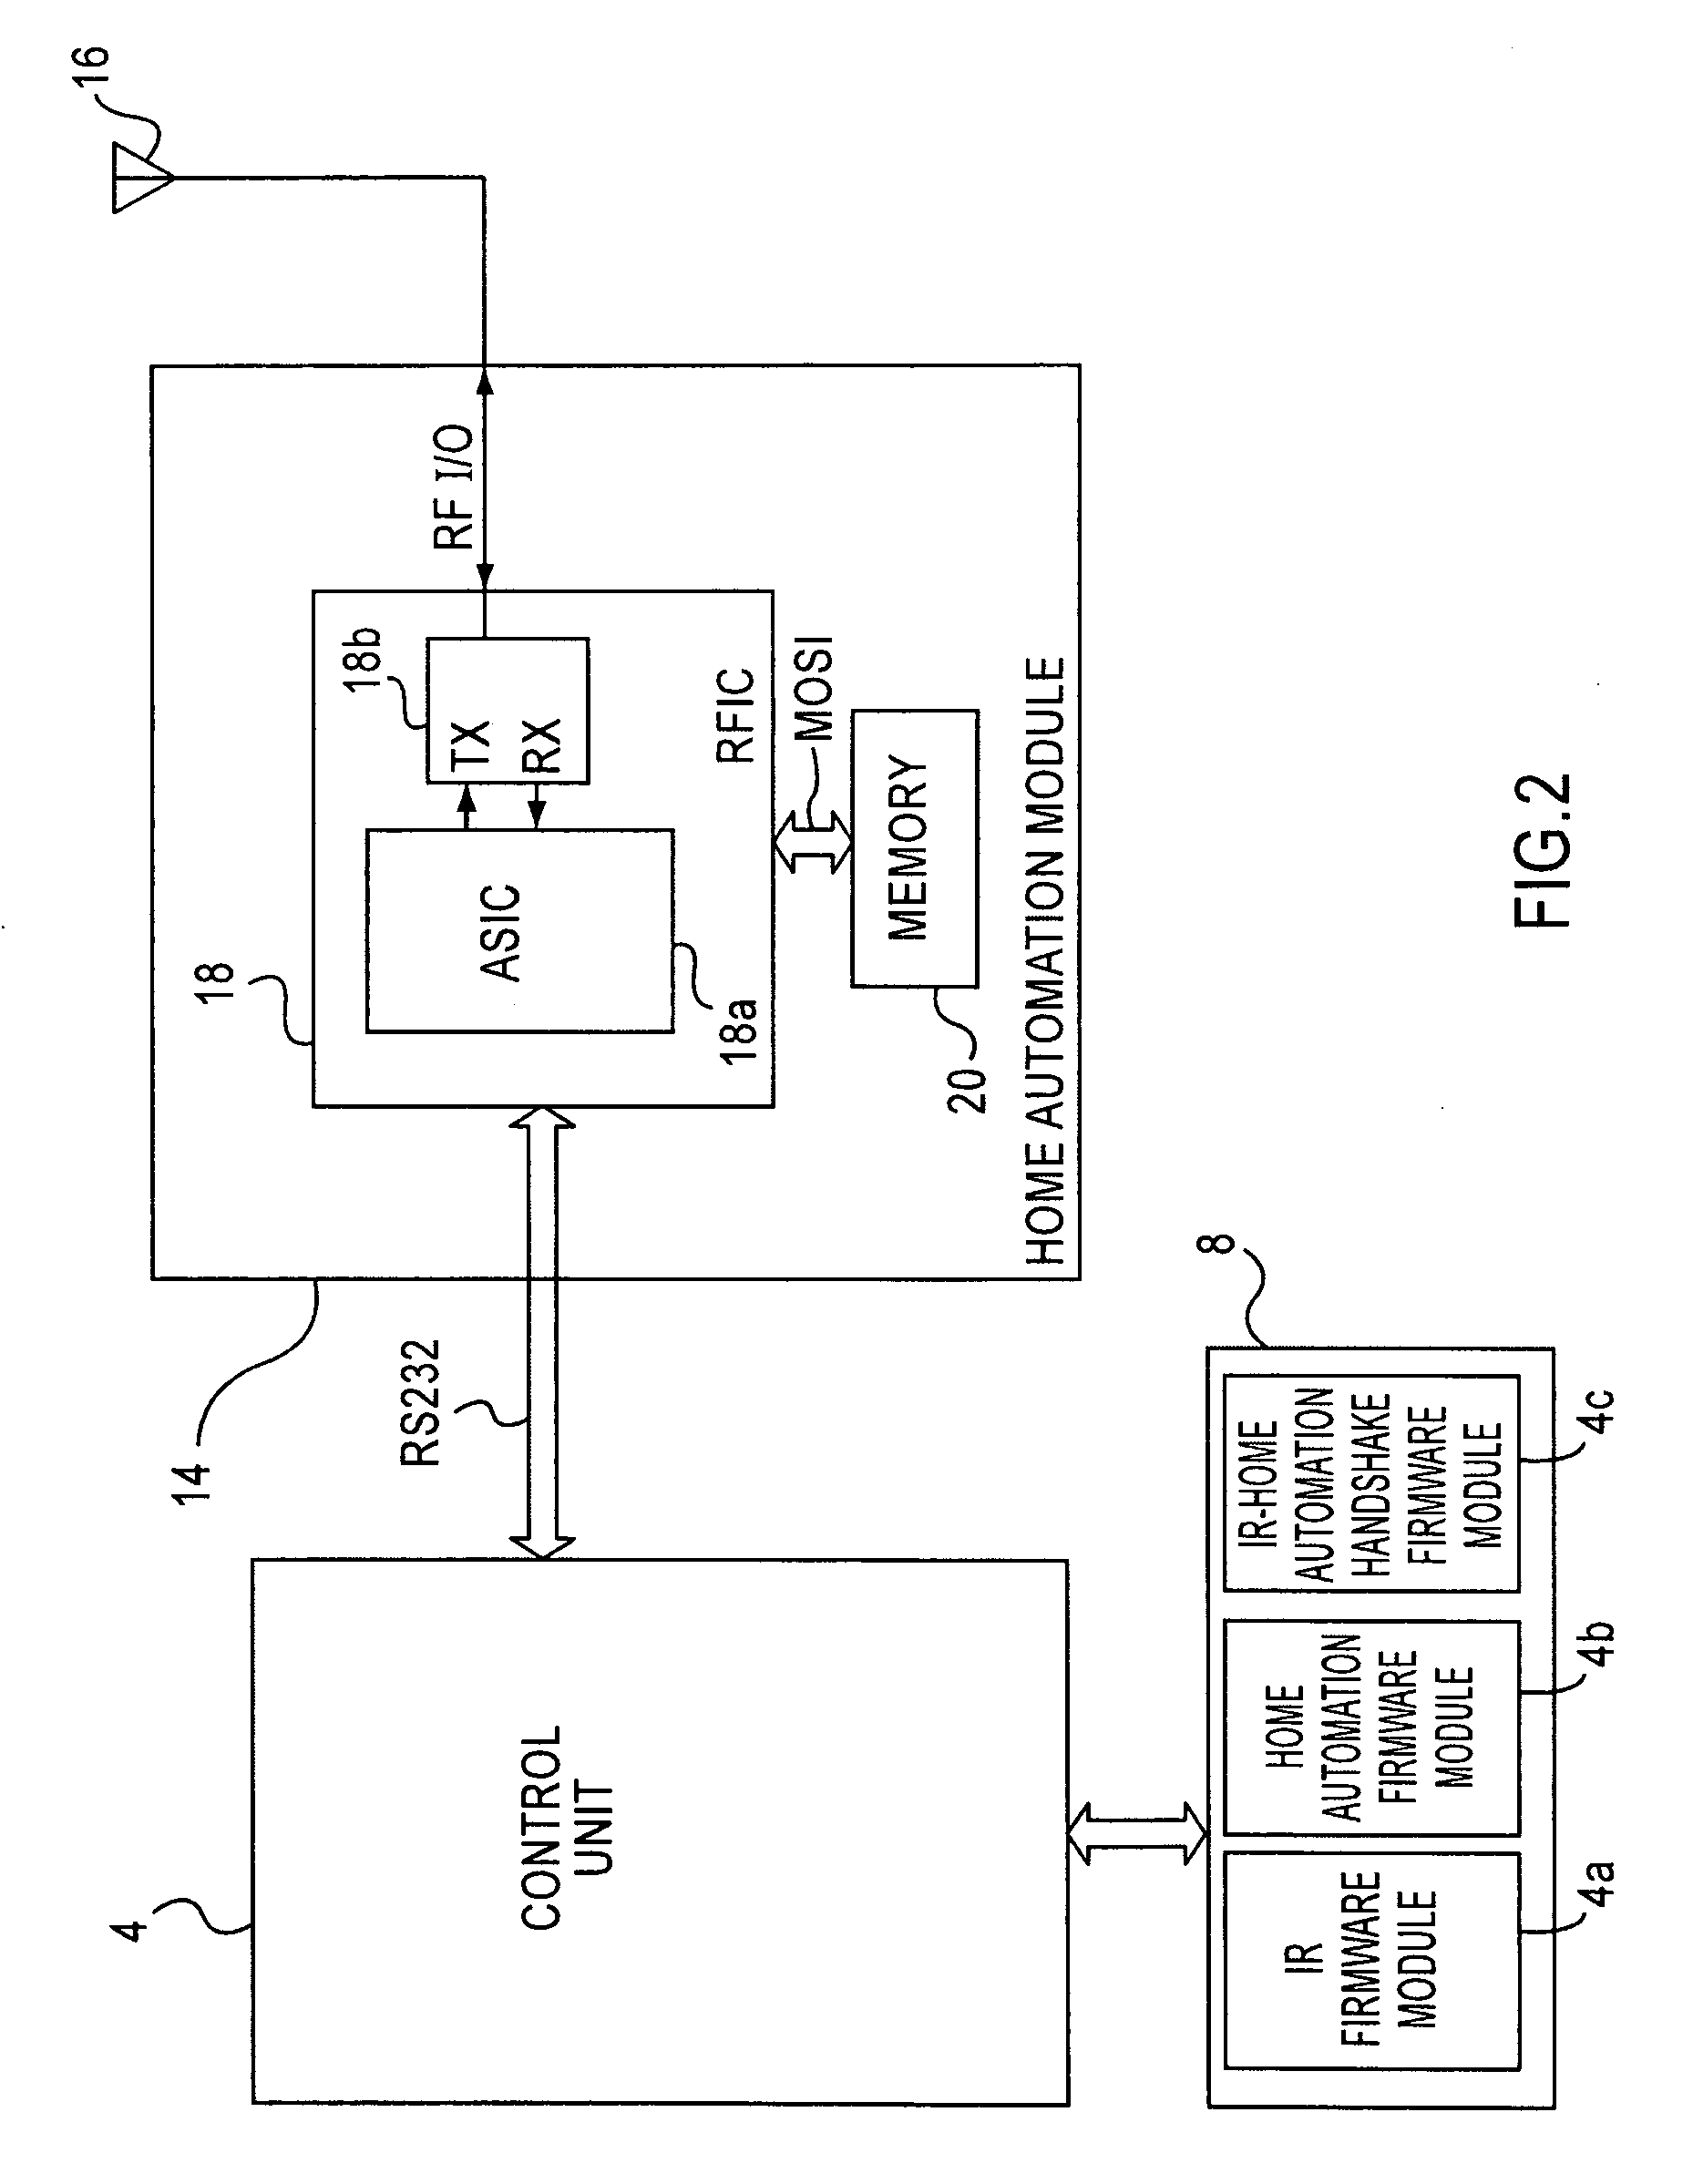 Universal remote controller having home automation function